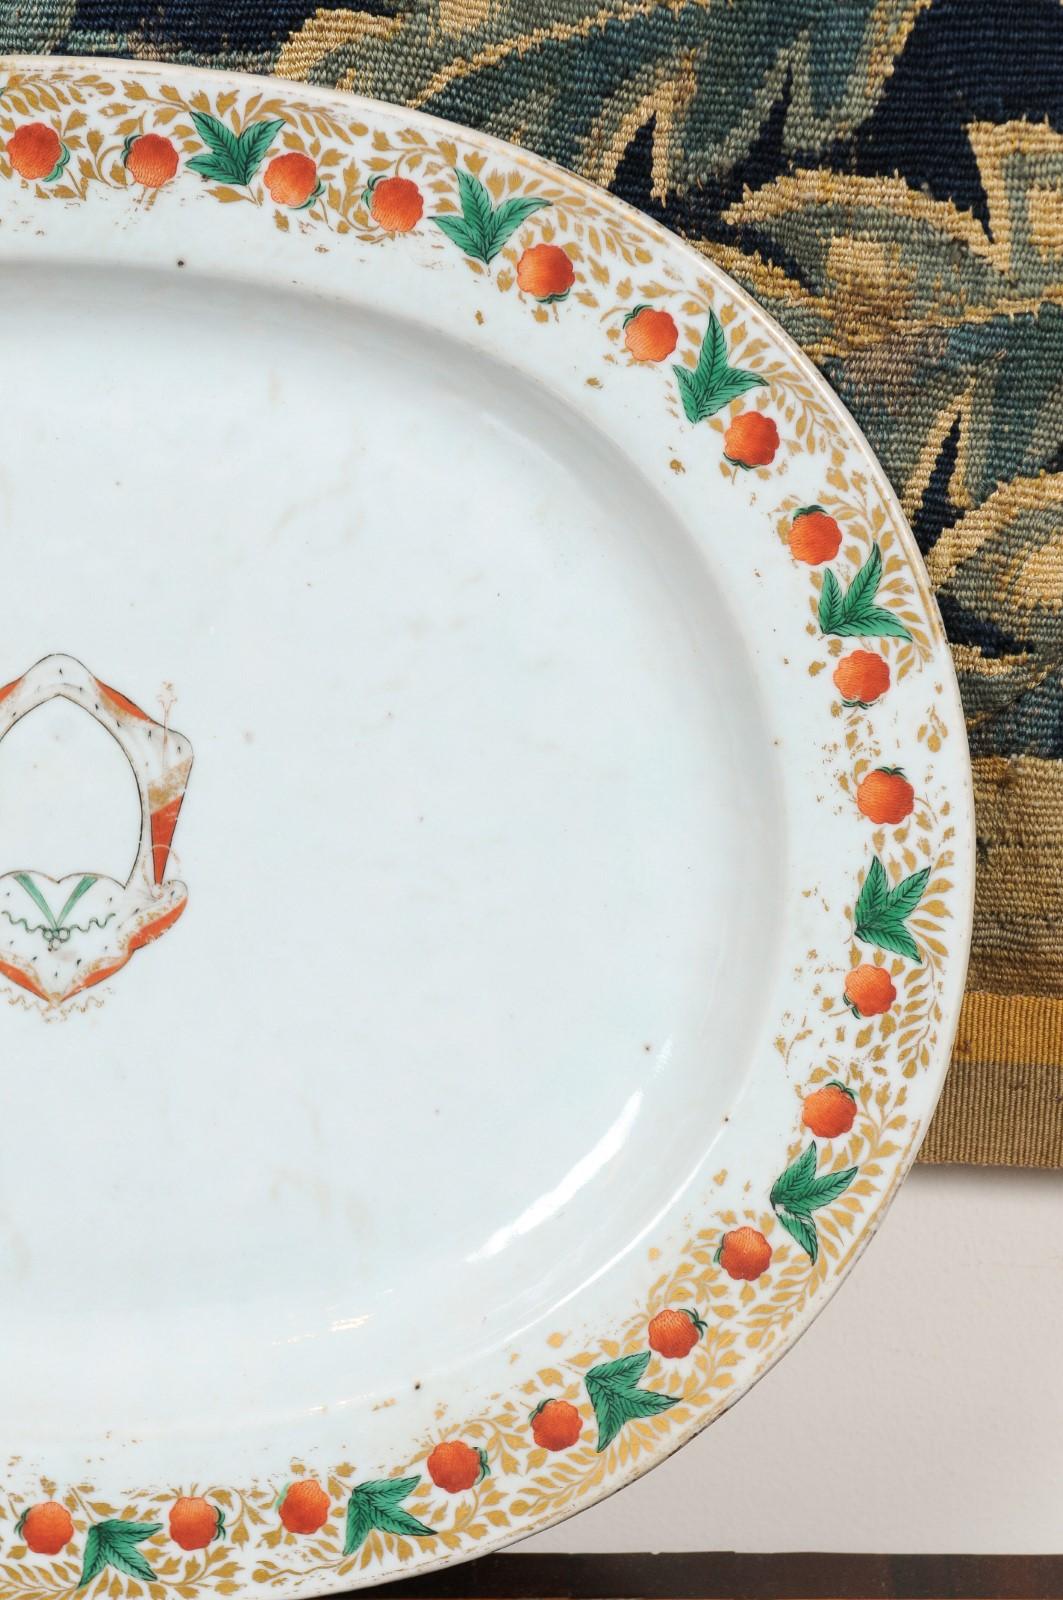 Chinese Export Armorial Porcelain Platter with Strawberry Pattern, 19th Century For Sale 4